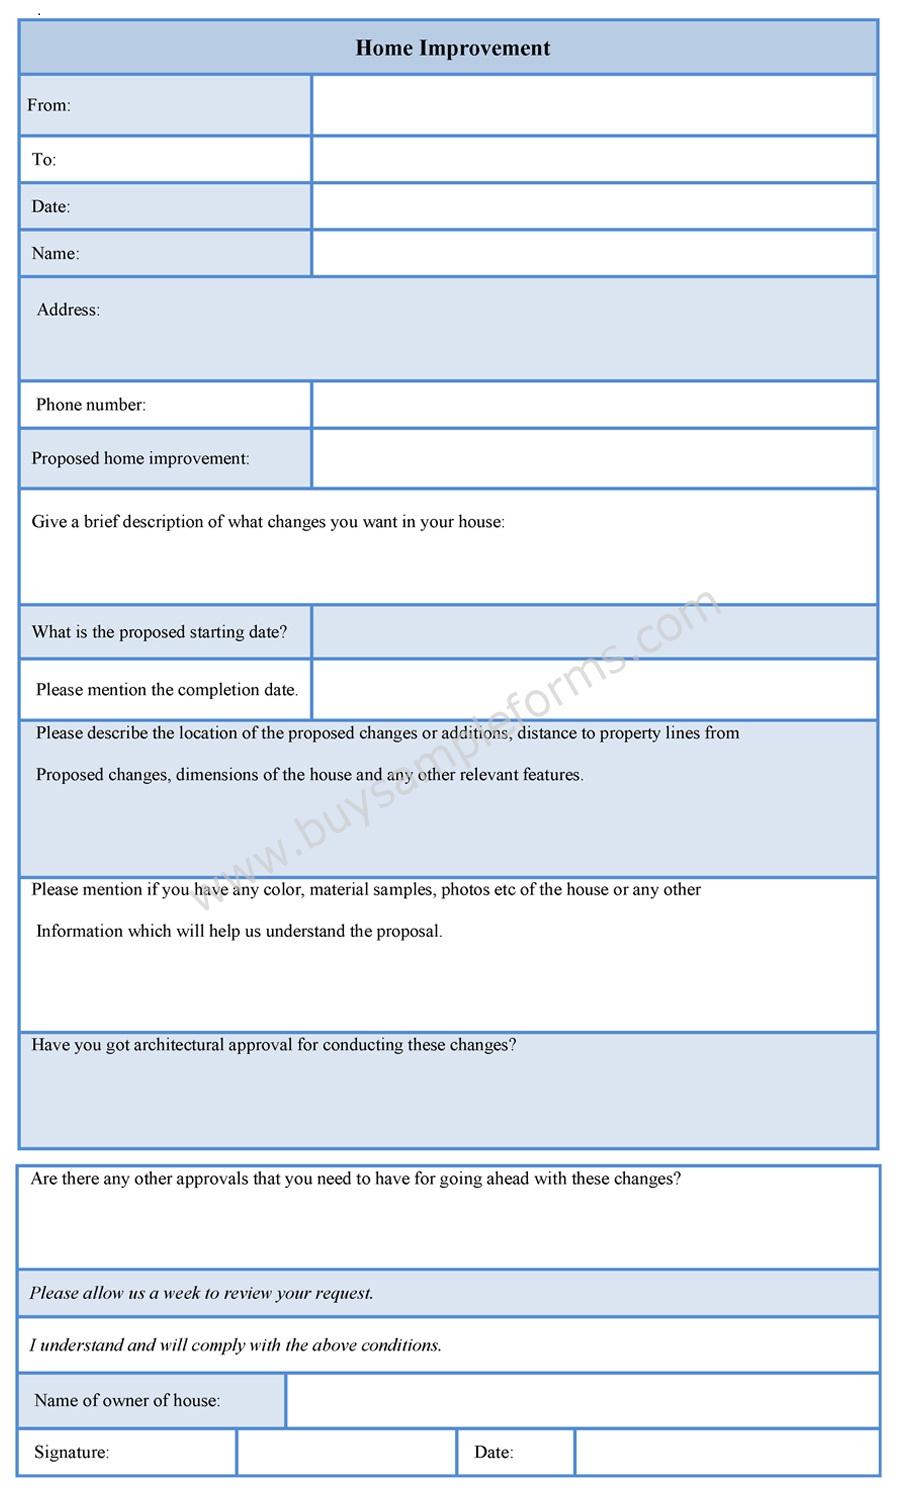 Home Improvement Form Home Improvement Contract Template